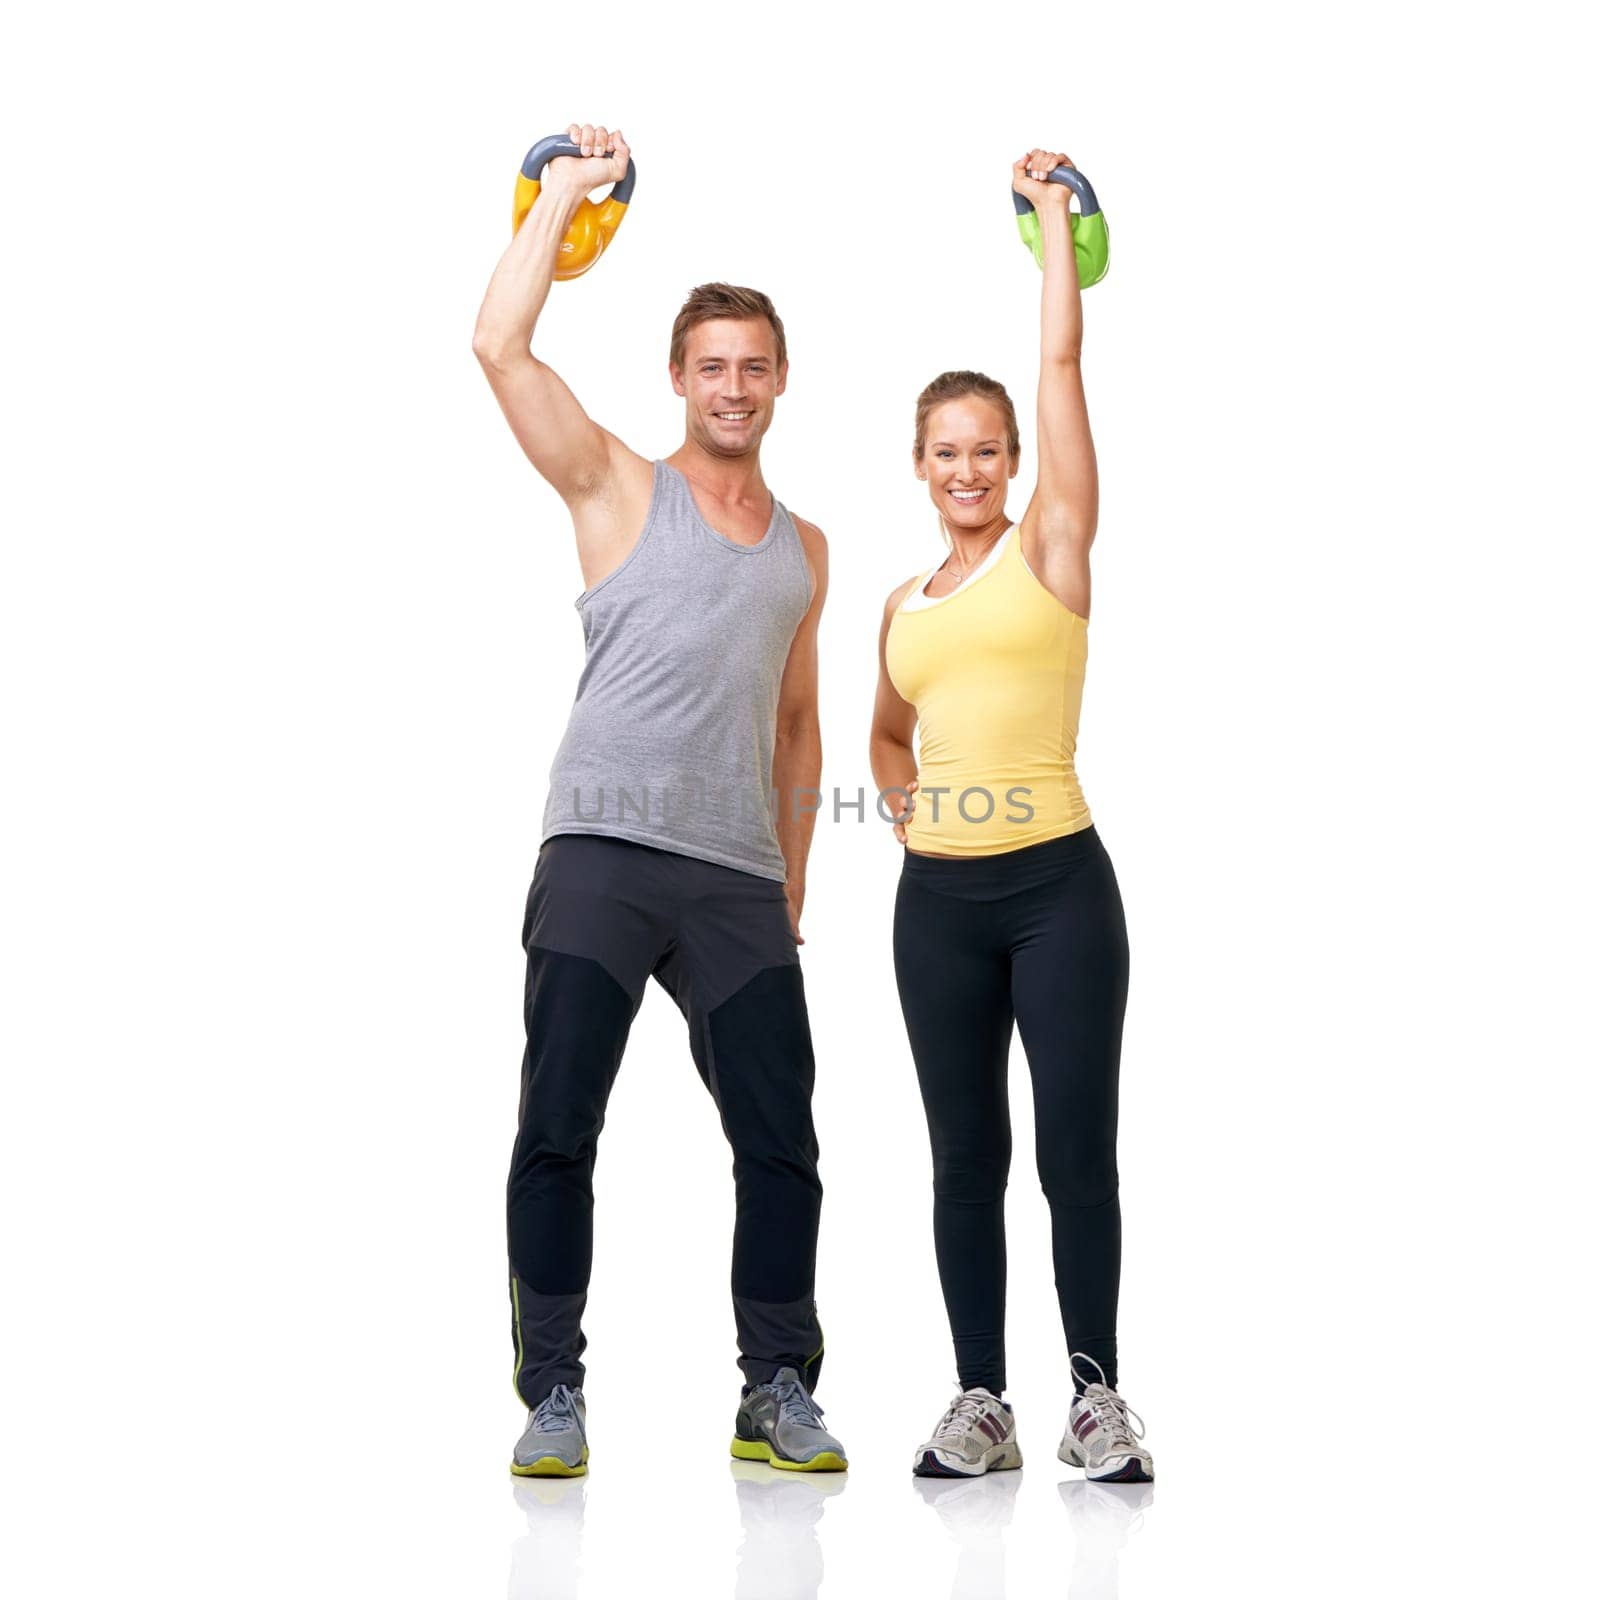 Studio portrait, kettlebell exercise and happy people celebrate muscle growth, strength progress or weightlifting success. Winner, bodybuilding achievement and athlete team goals on white background.